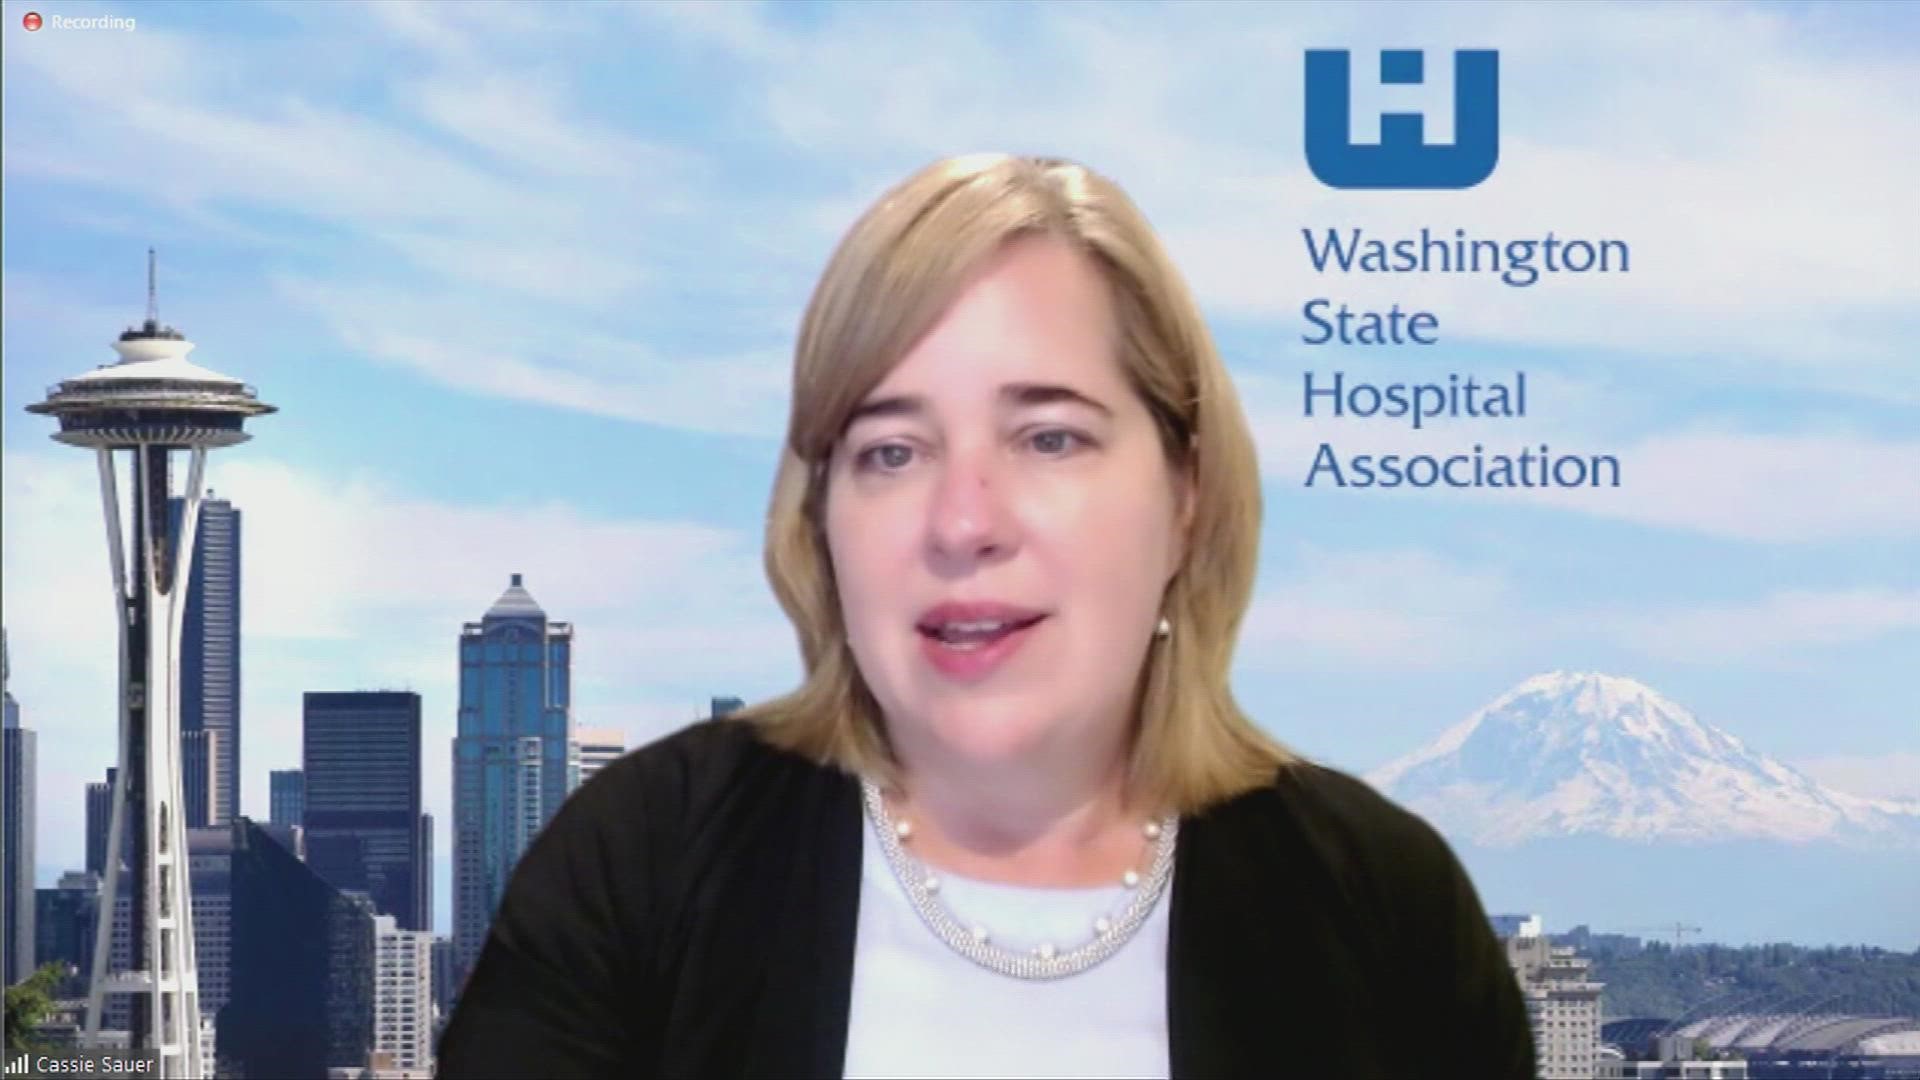 Washington hospitals expect to lose up to 5% of staff due to the COVID-19 vaccine mandate.